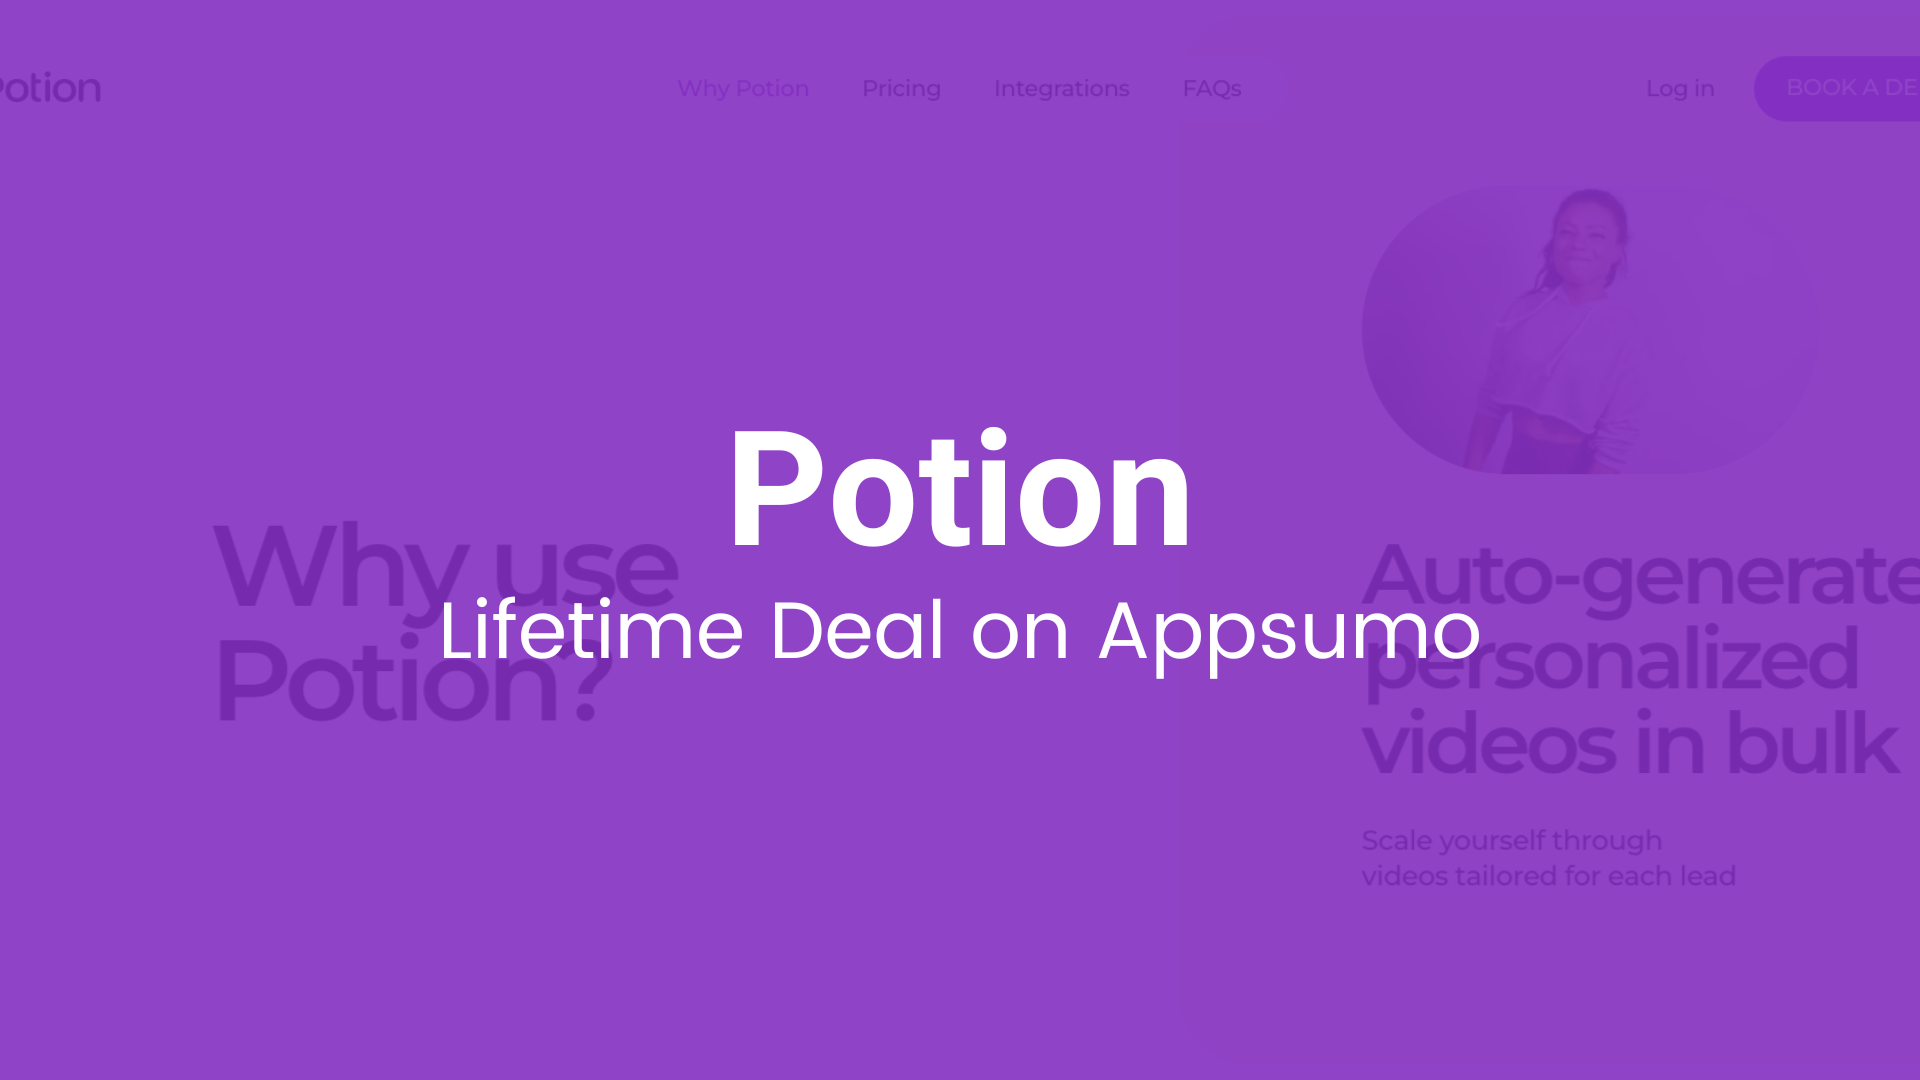 Potion: Bulk Video Personalization Made Easy